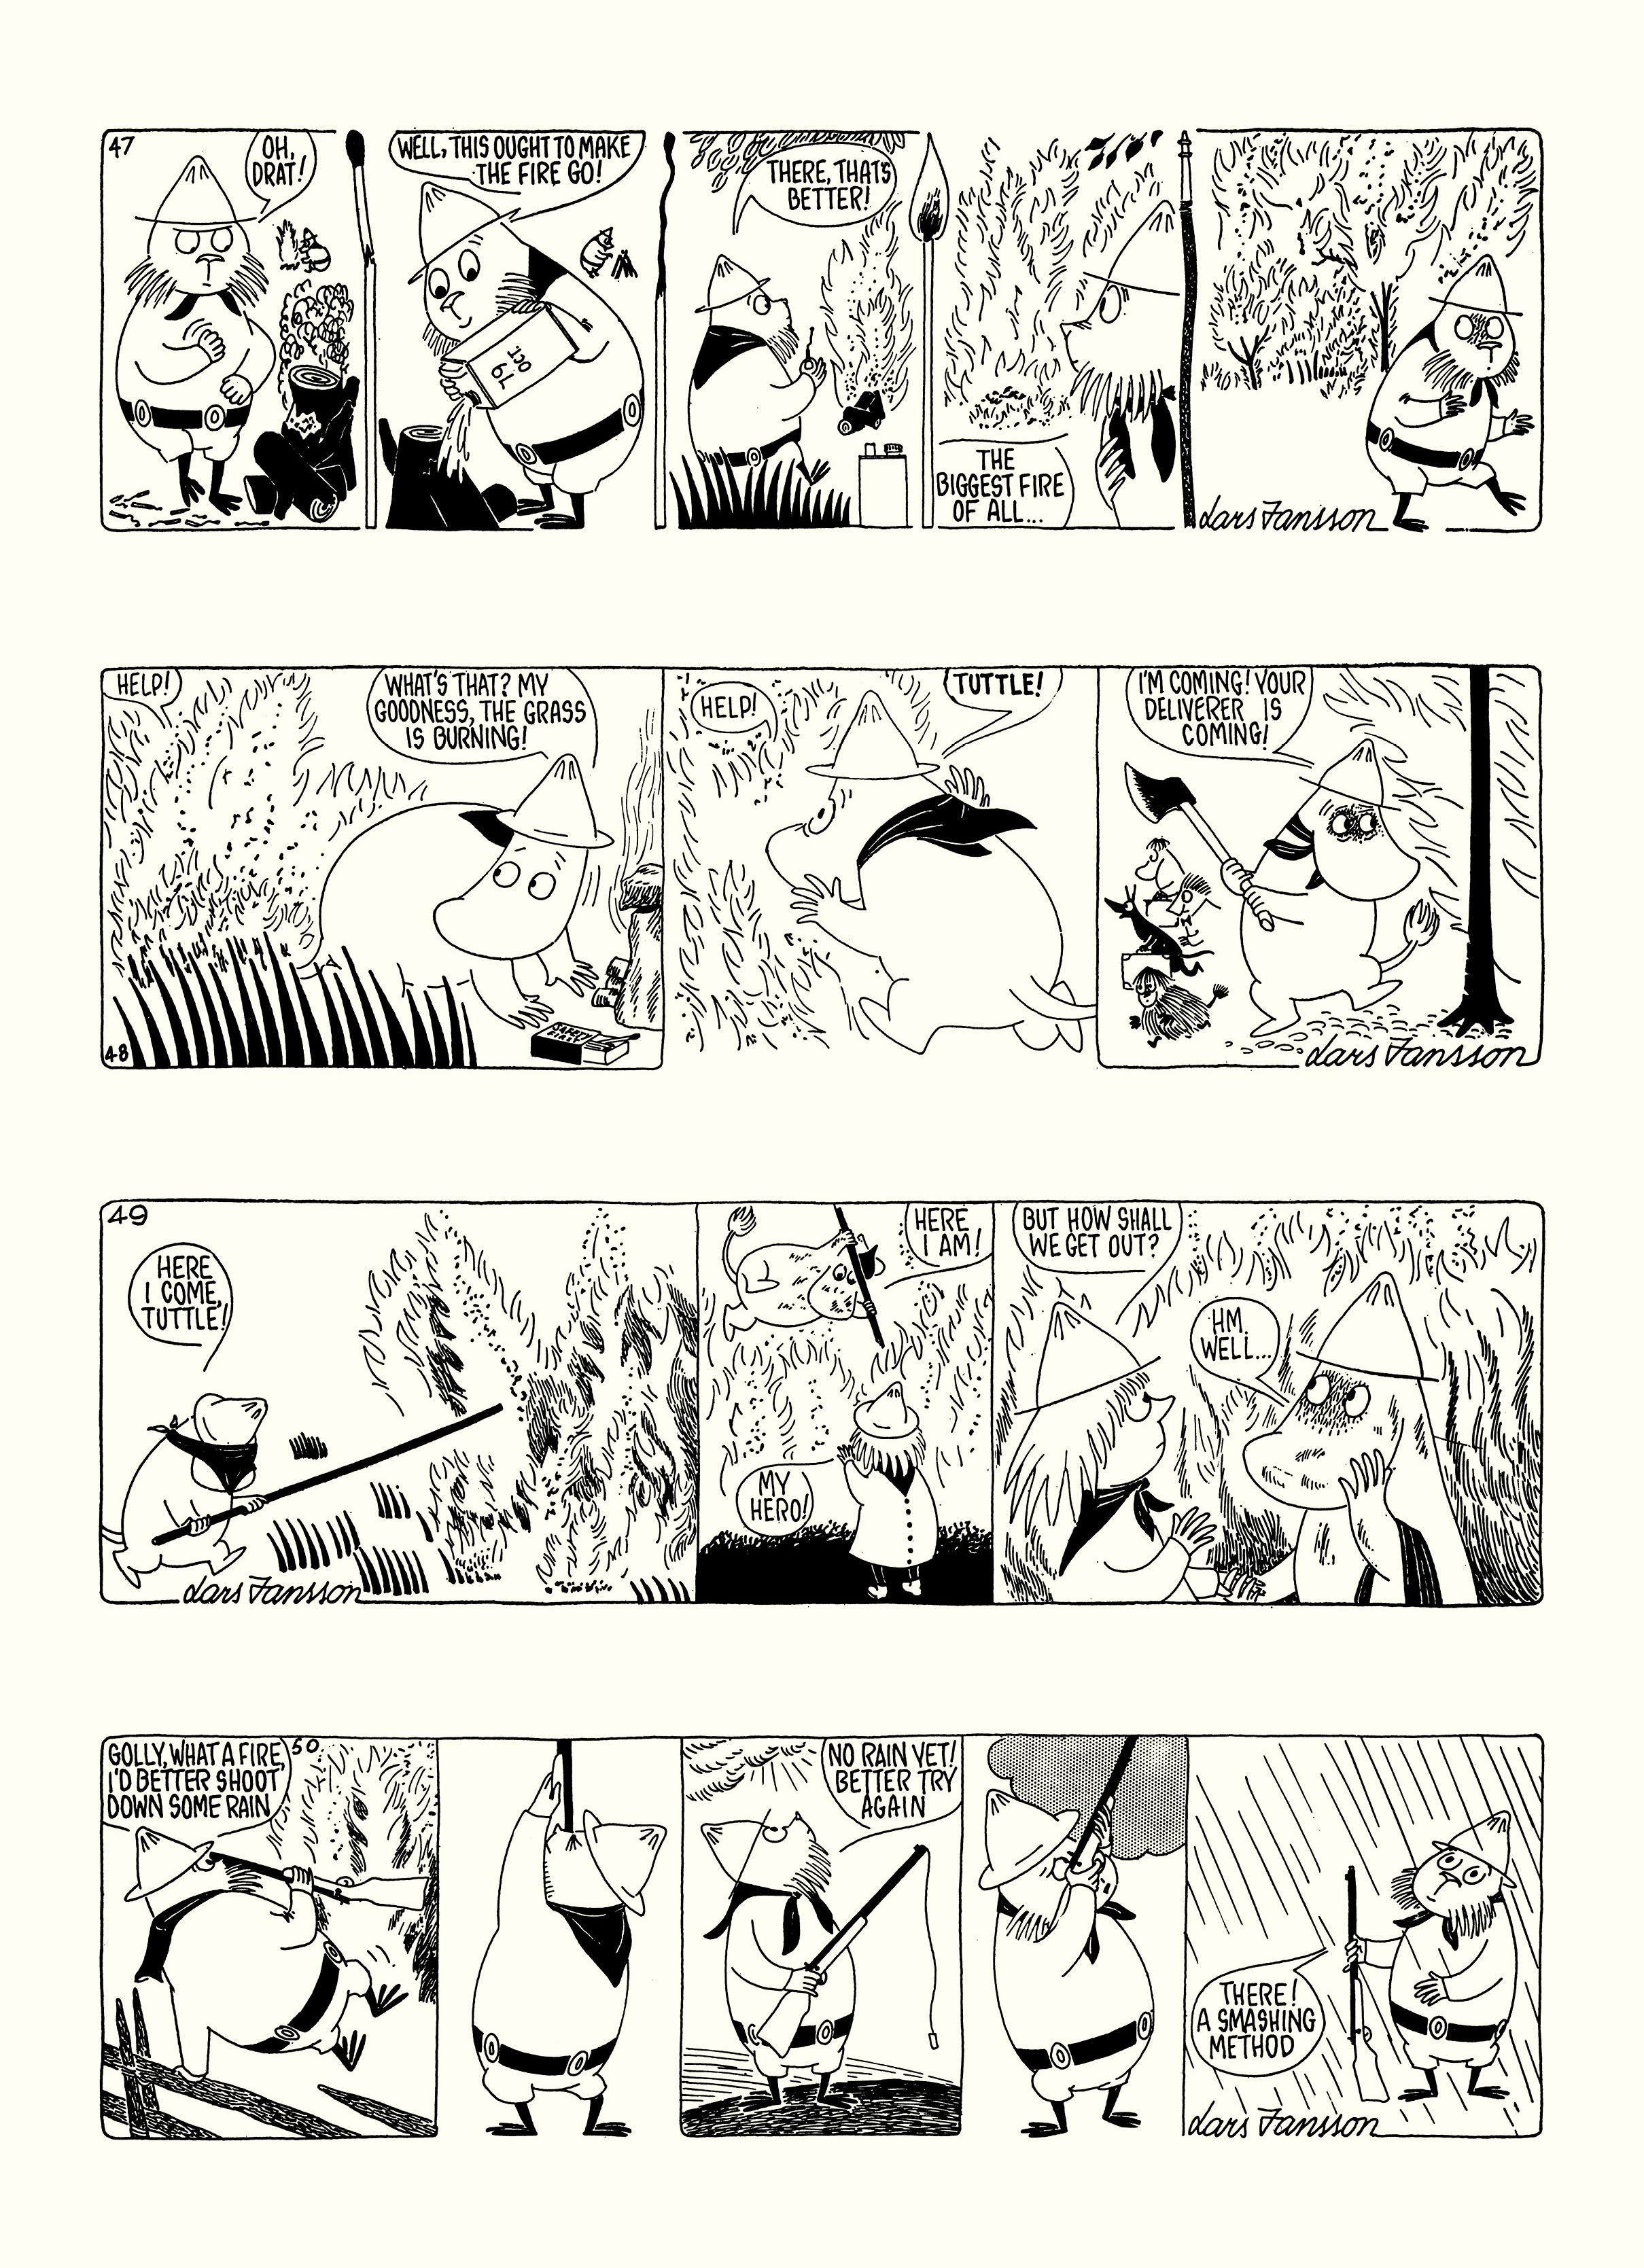 Read online Moomin: The Complete Lars Jansson Comic Strip comic -  Issue # TPB 7 - 39